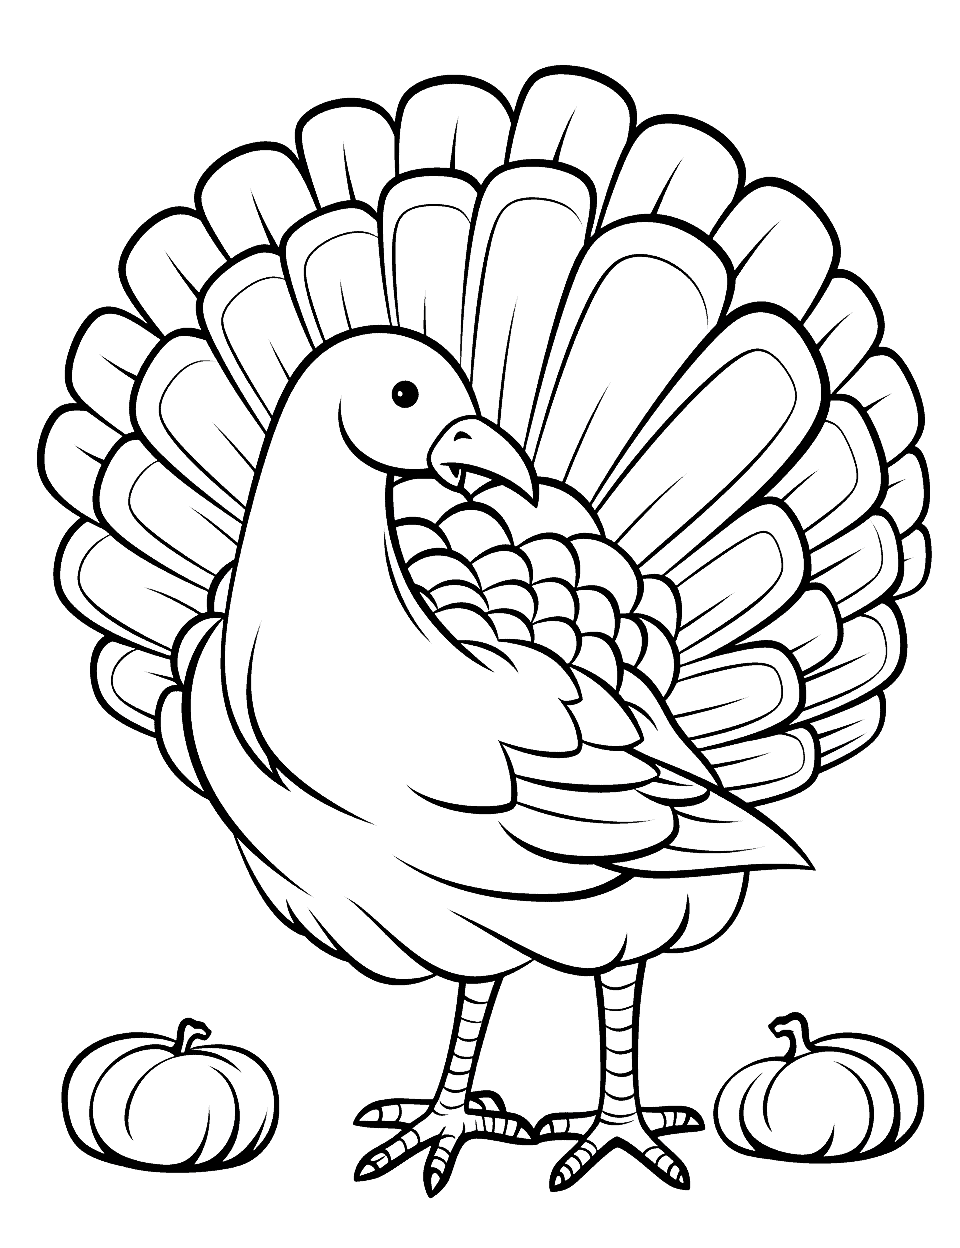 Rainbow Colored Turkey Coloring Page - An image of a turkey with feathers waiting to be filled in with various colors of the rainbow.